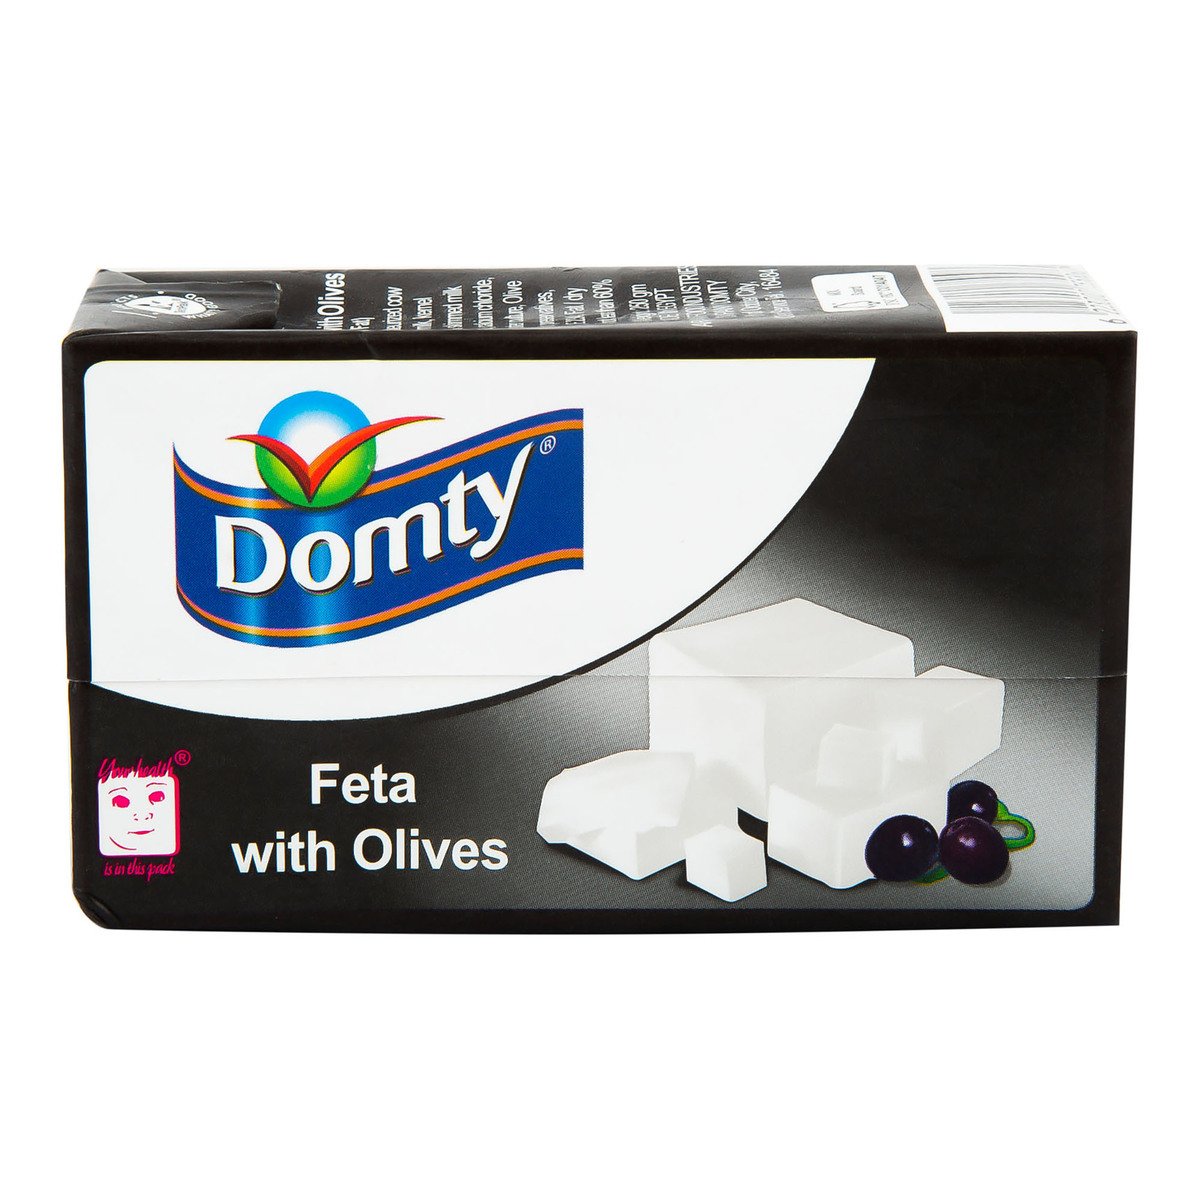 Domty Feta With Olives 250 g